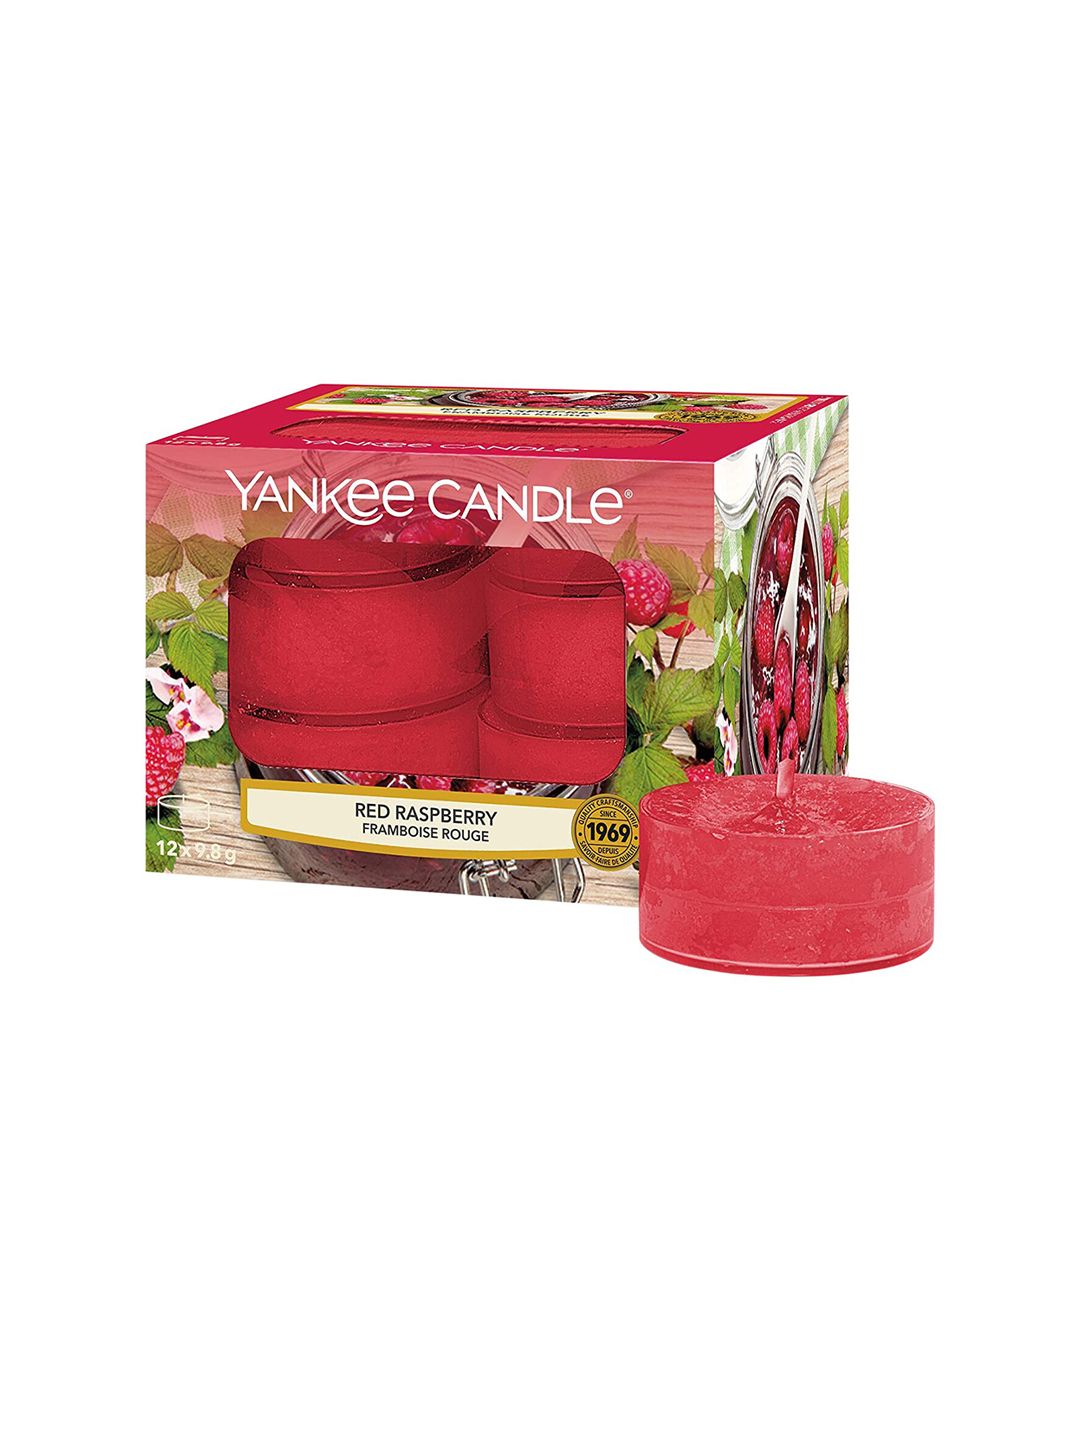 YANKEE CANDLE Set Of 12 Red Raspberry Tealight Candles Price in India